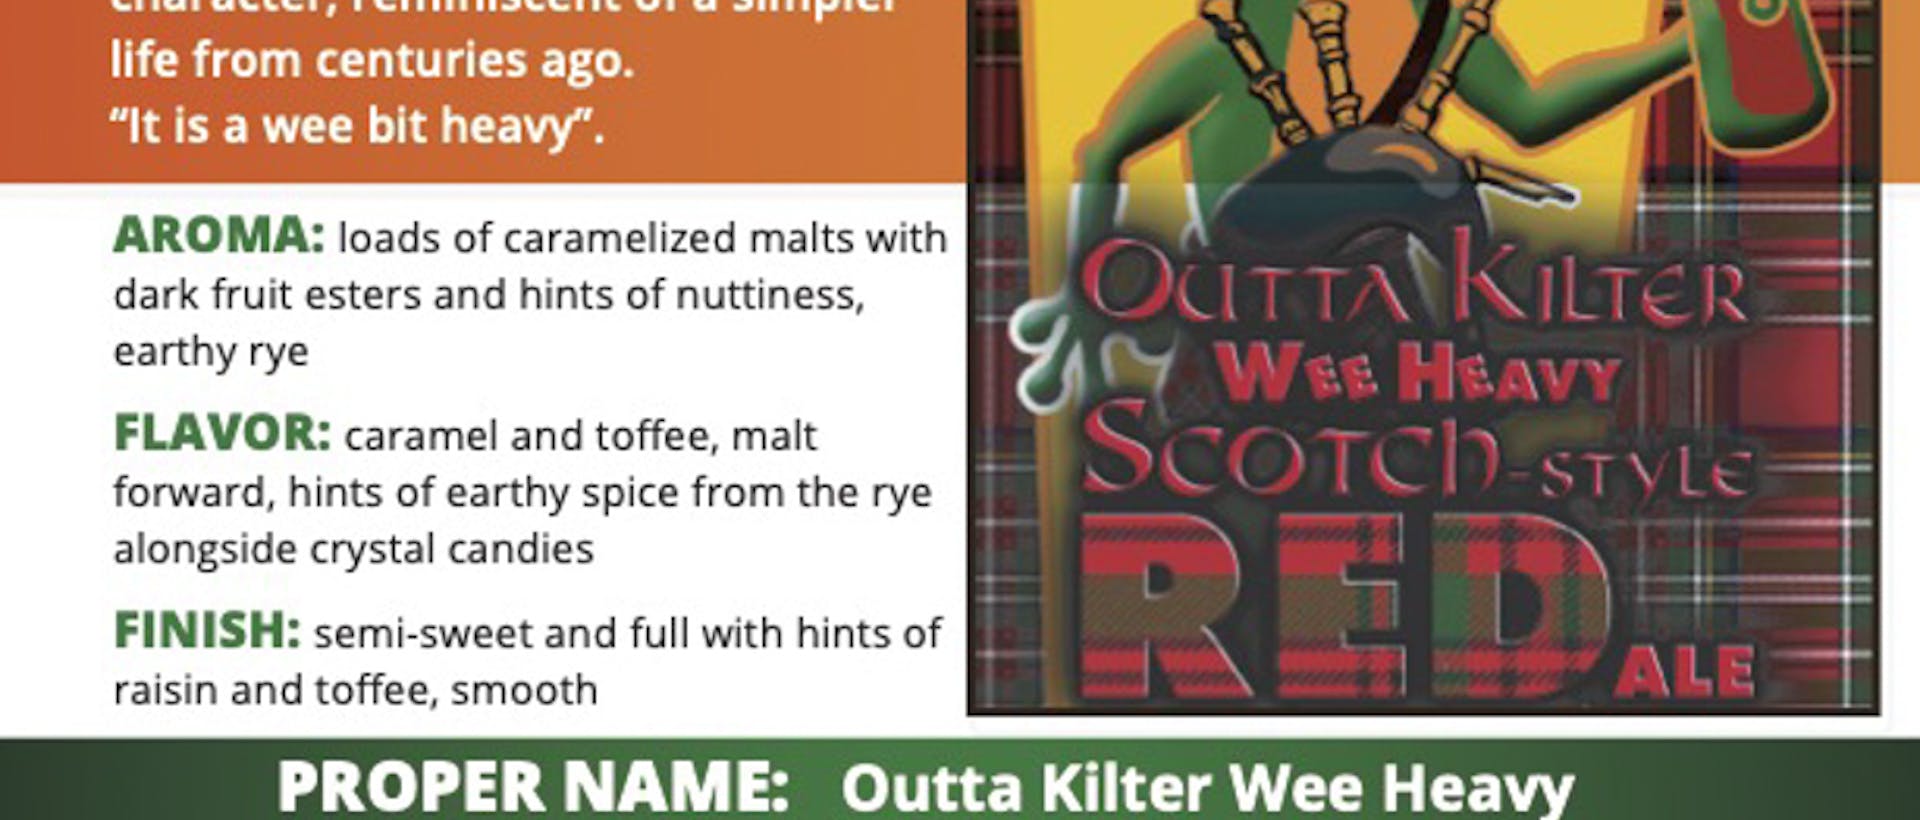 HF_Sell Sheet - Seasonal Series - Outta Kilter Wee Heavy Scotch Style Ale (updated 01-27-22)